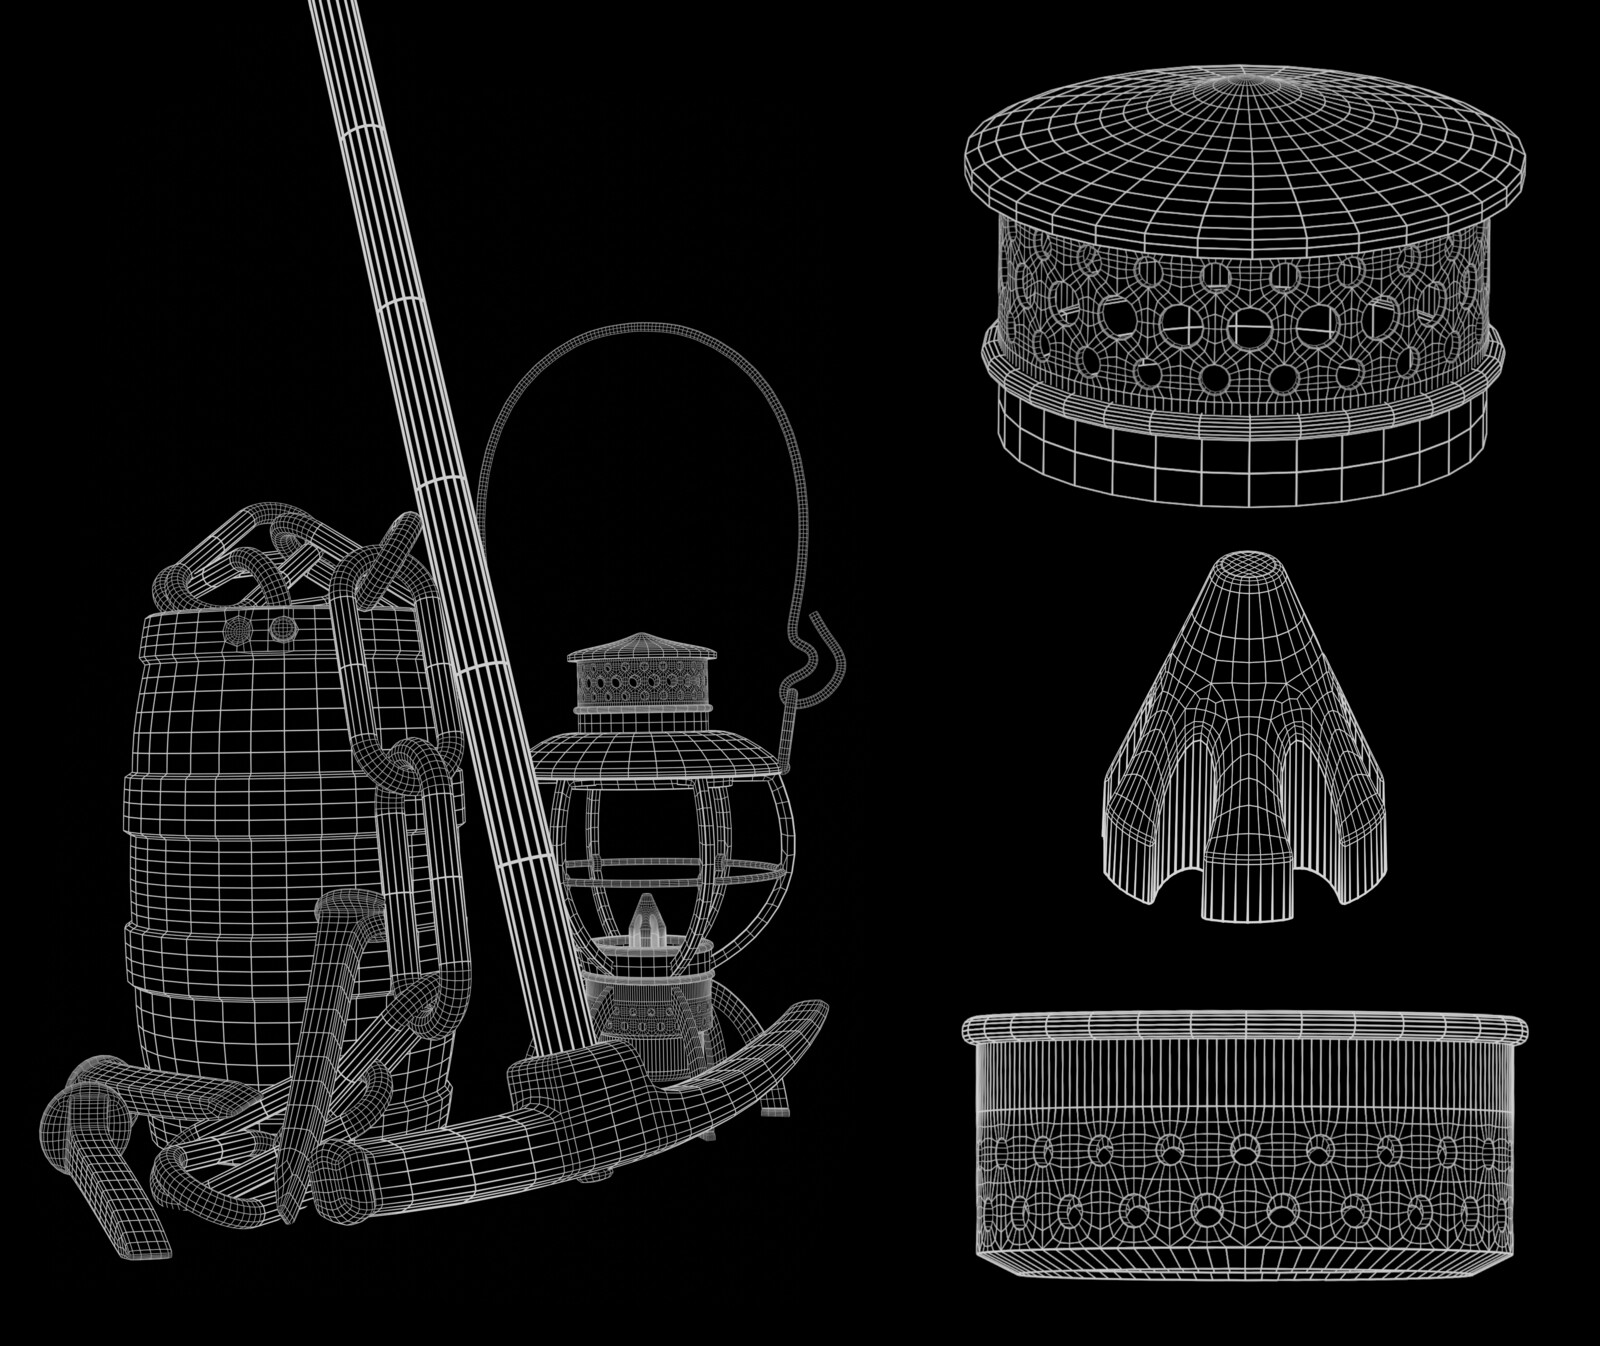 Full wireframe and lantern topology detail